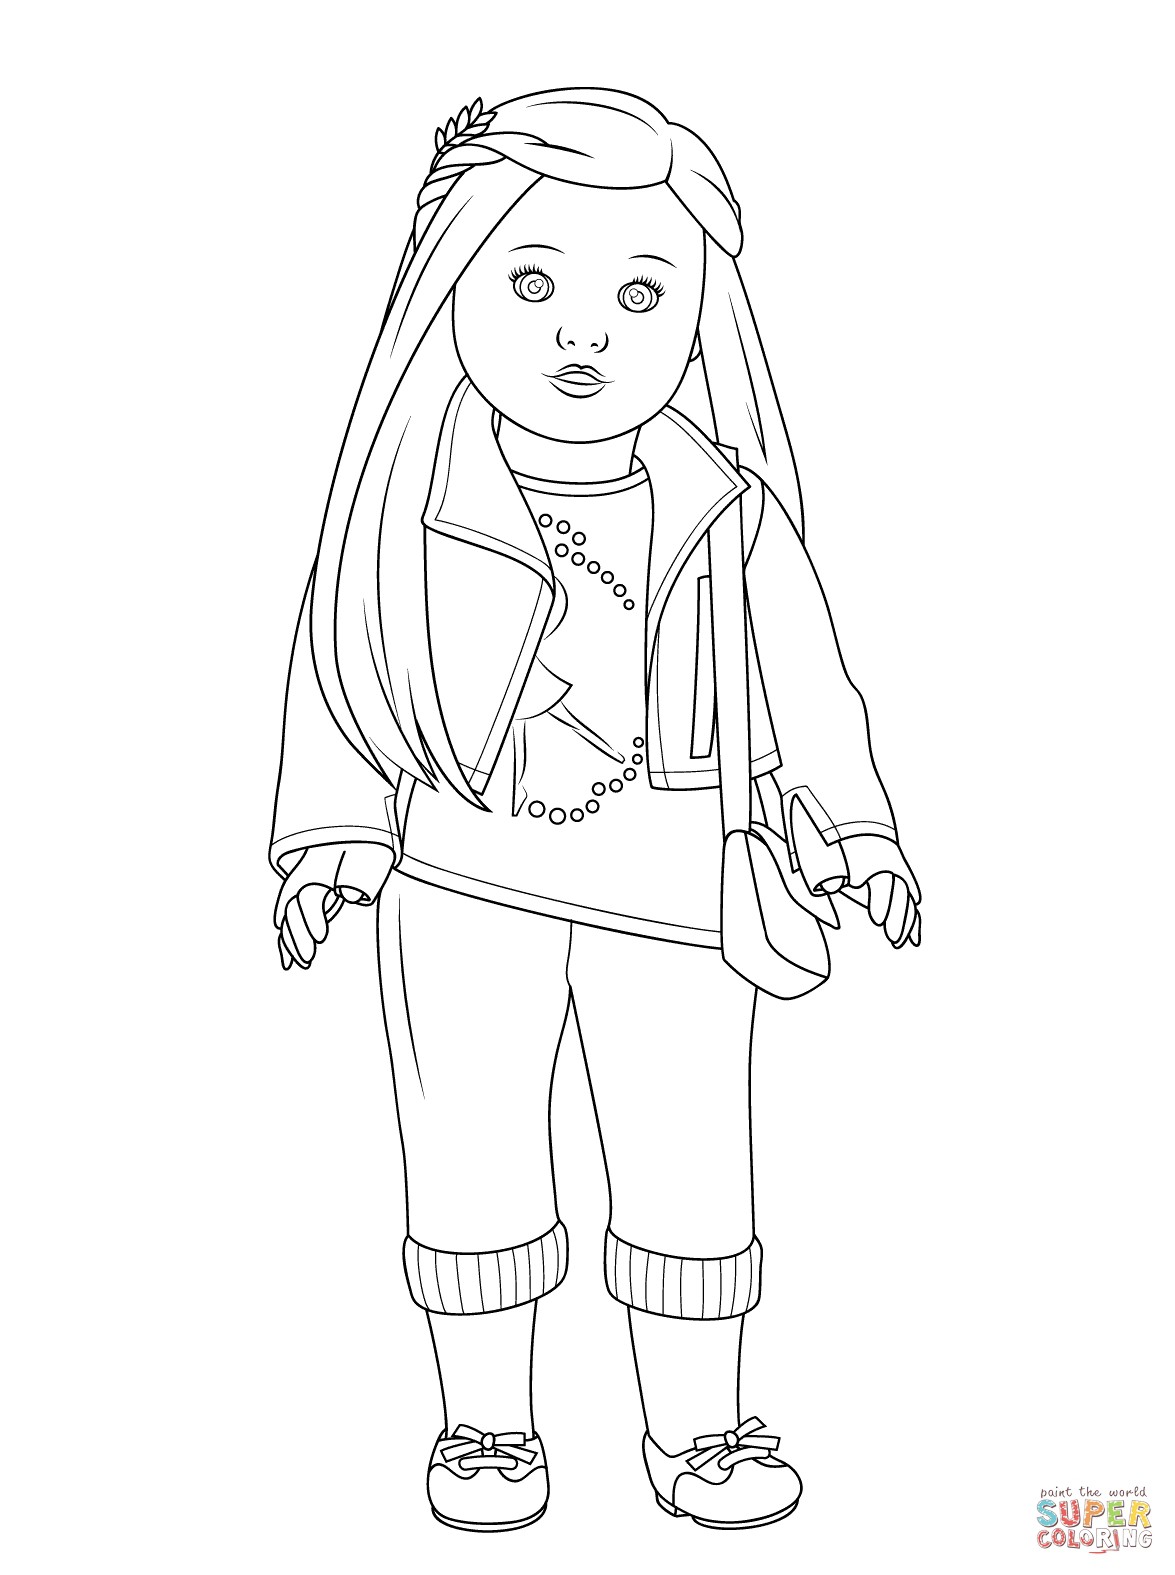 Awesome american girl doll printable coloring pages 8